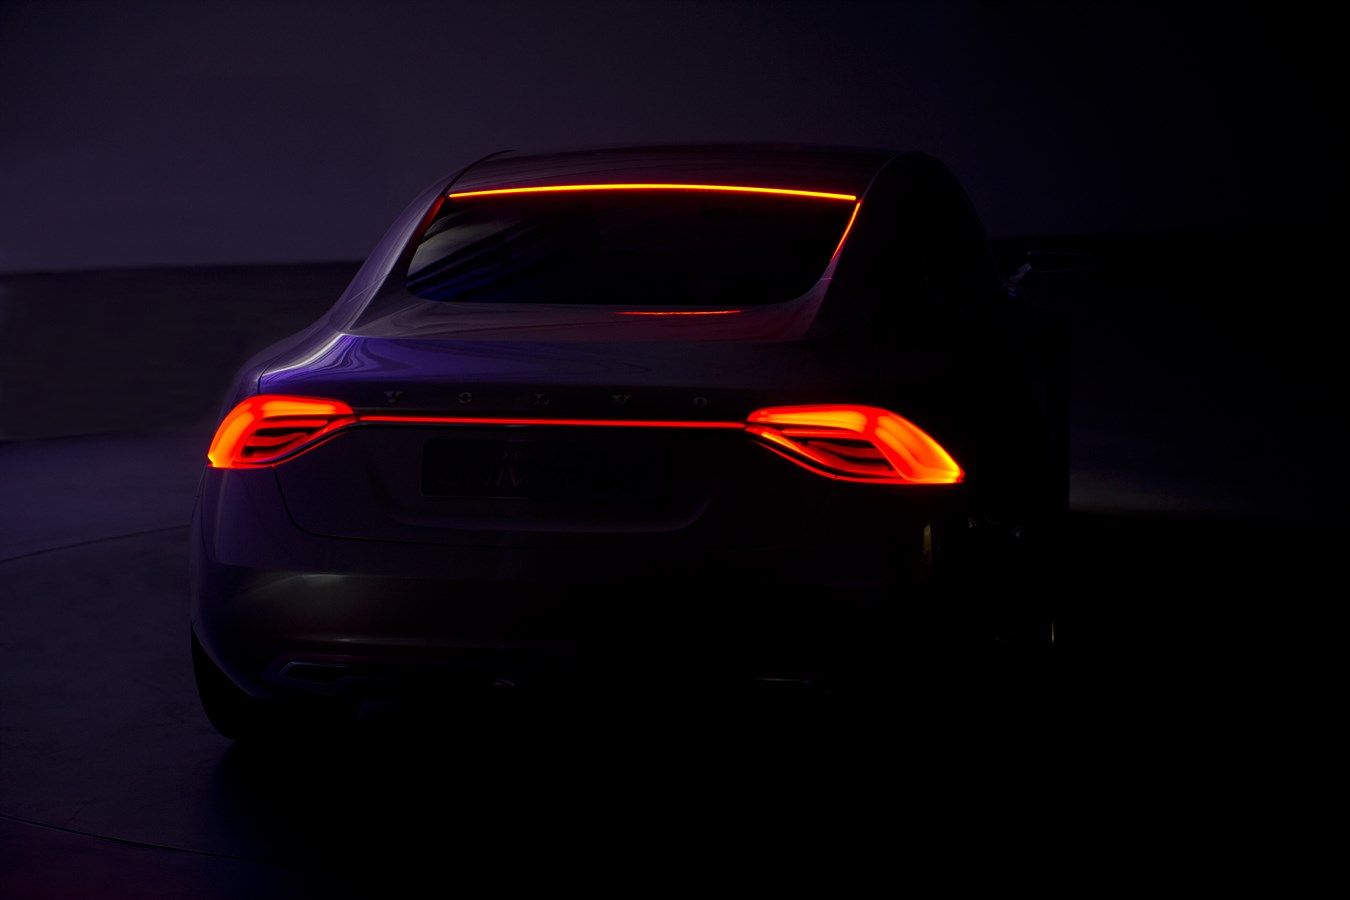 Volvo Concept Universe, rear lights in the dark (2 of 2 images showing the lights)